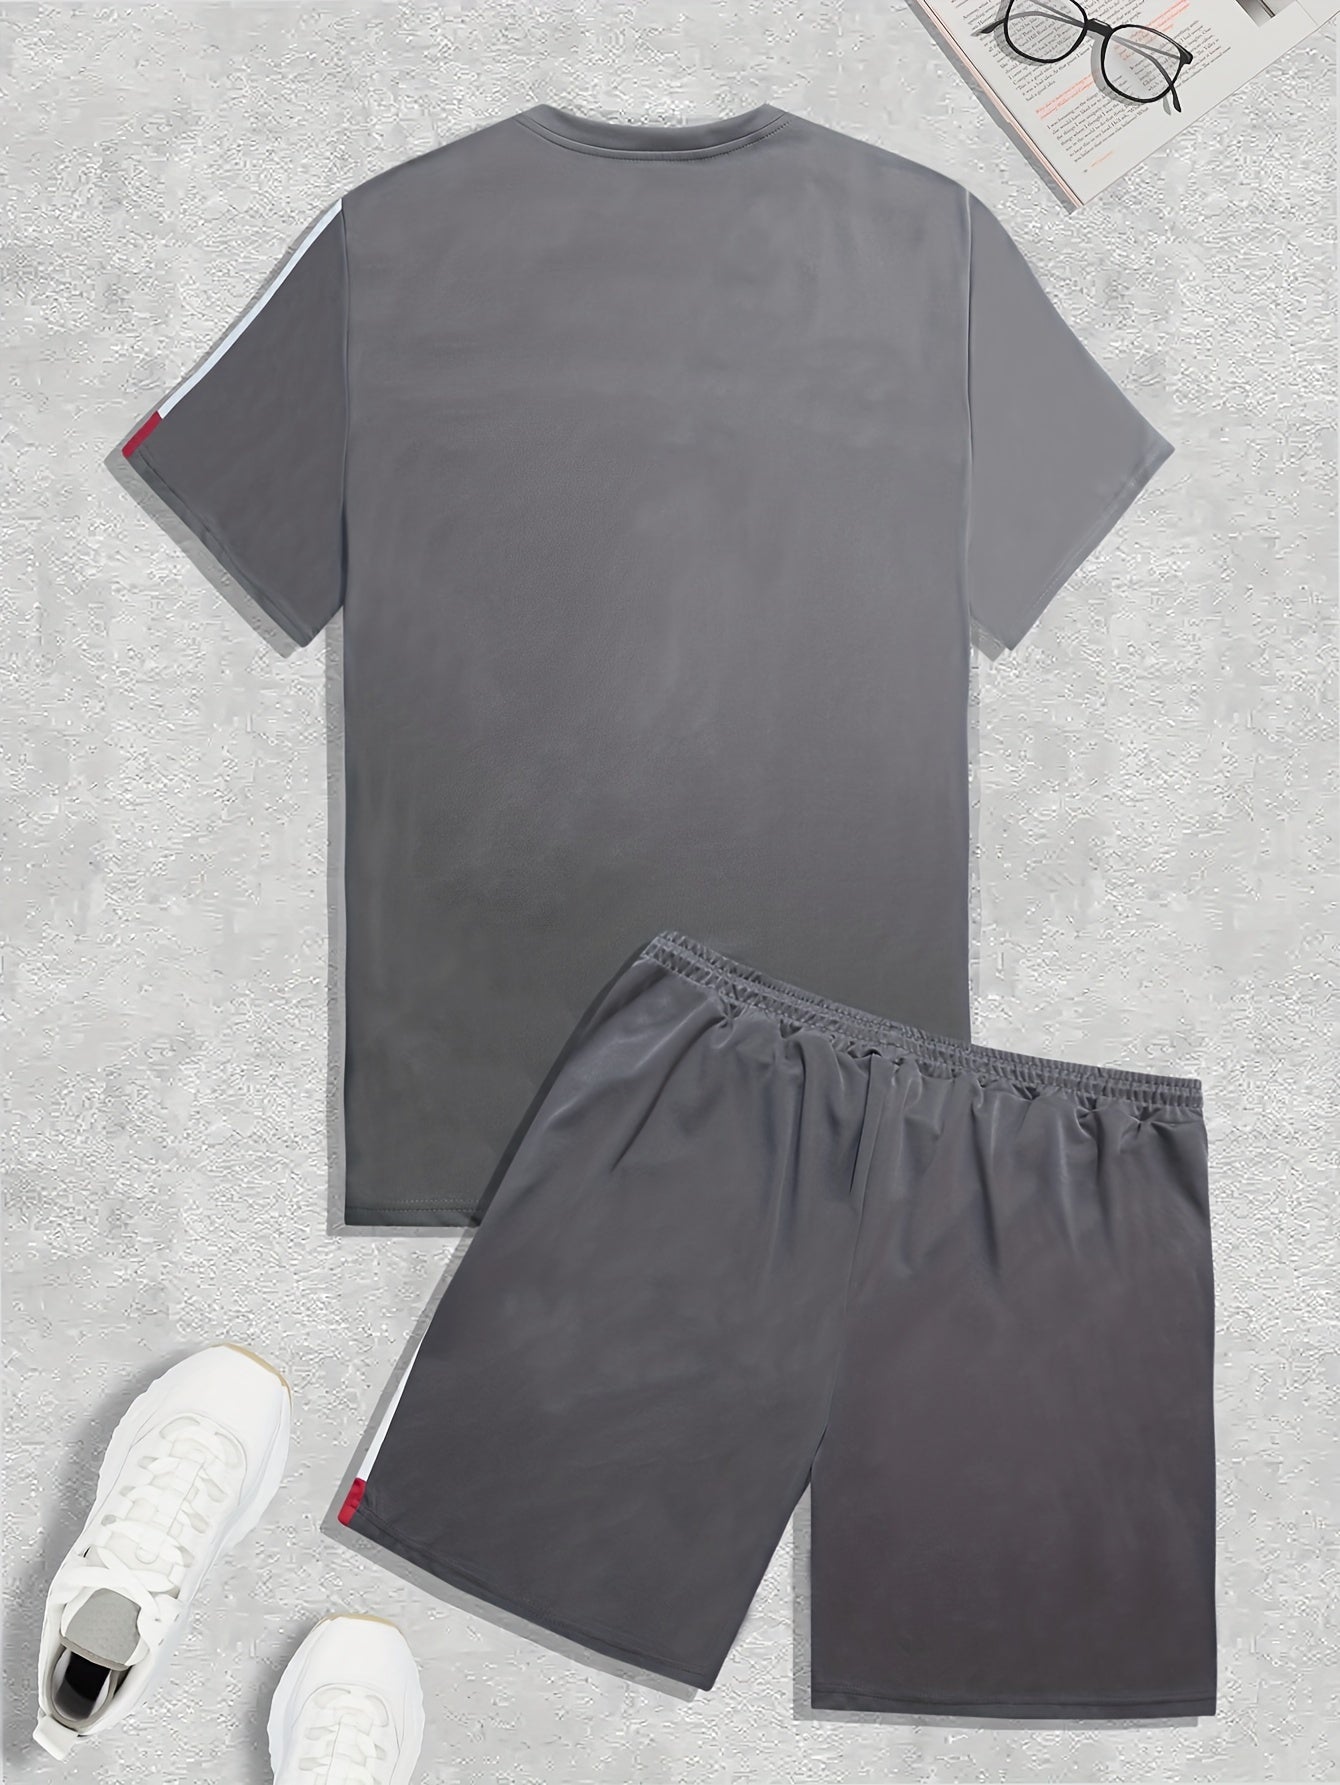 Men's Colorblock Casual T-shirt Outfit Set, 2 Pieces Round Neck Short Sleeve Tees And Drawstring Short Pants